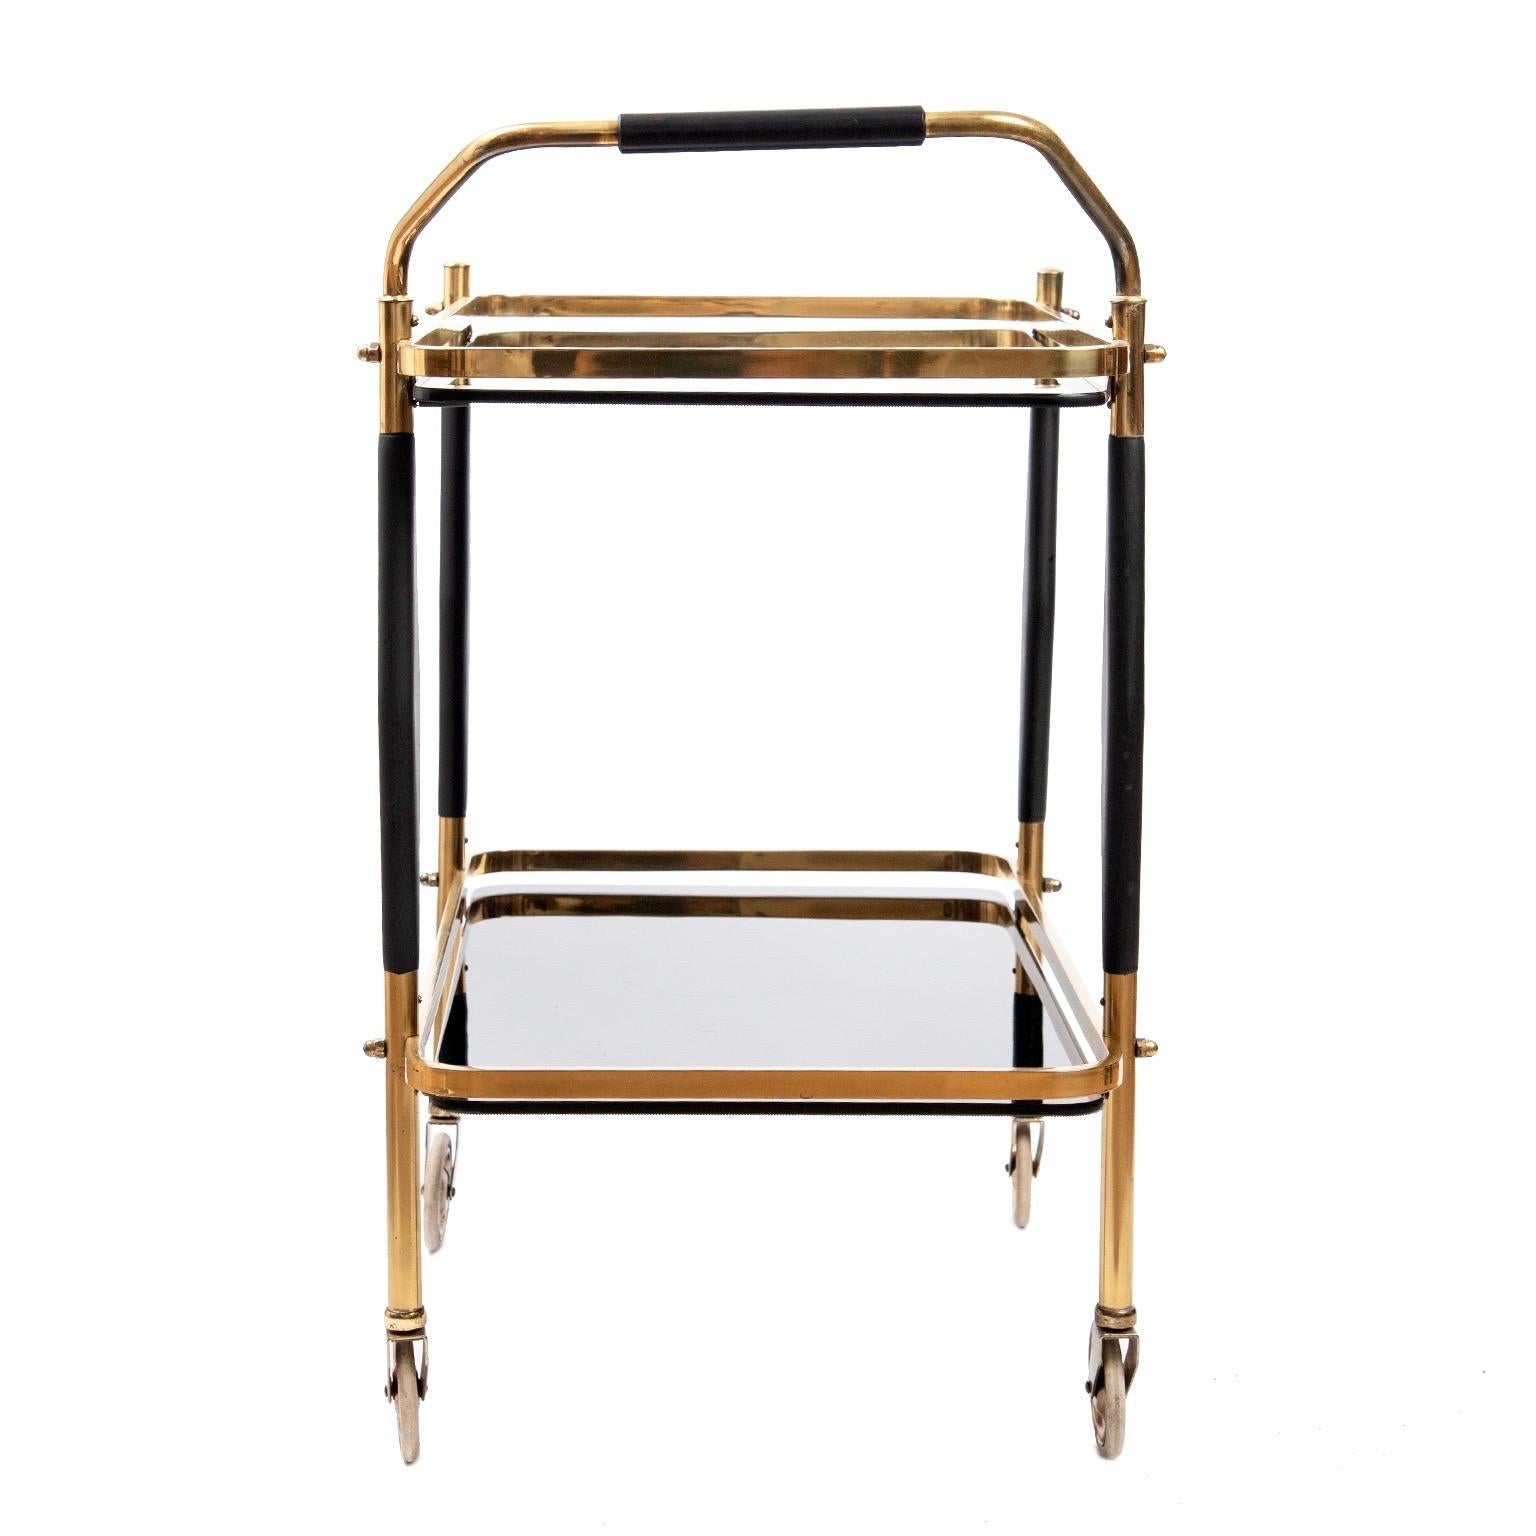 A little gem is how I would describe this vintage 1950s brass bar cart with original solid 